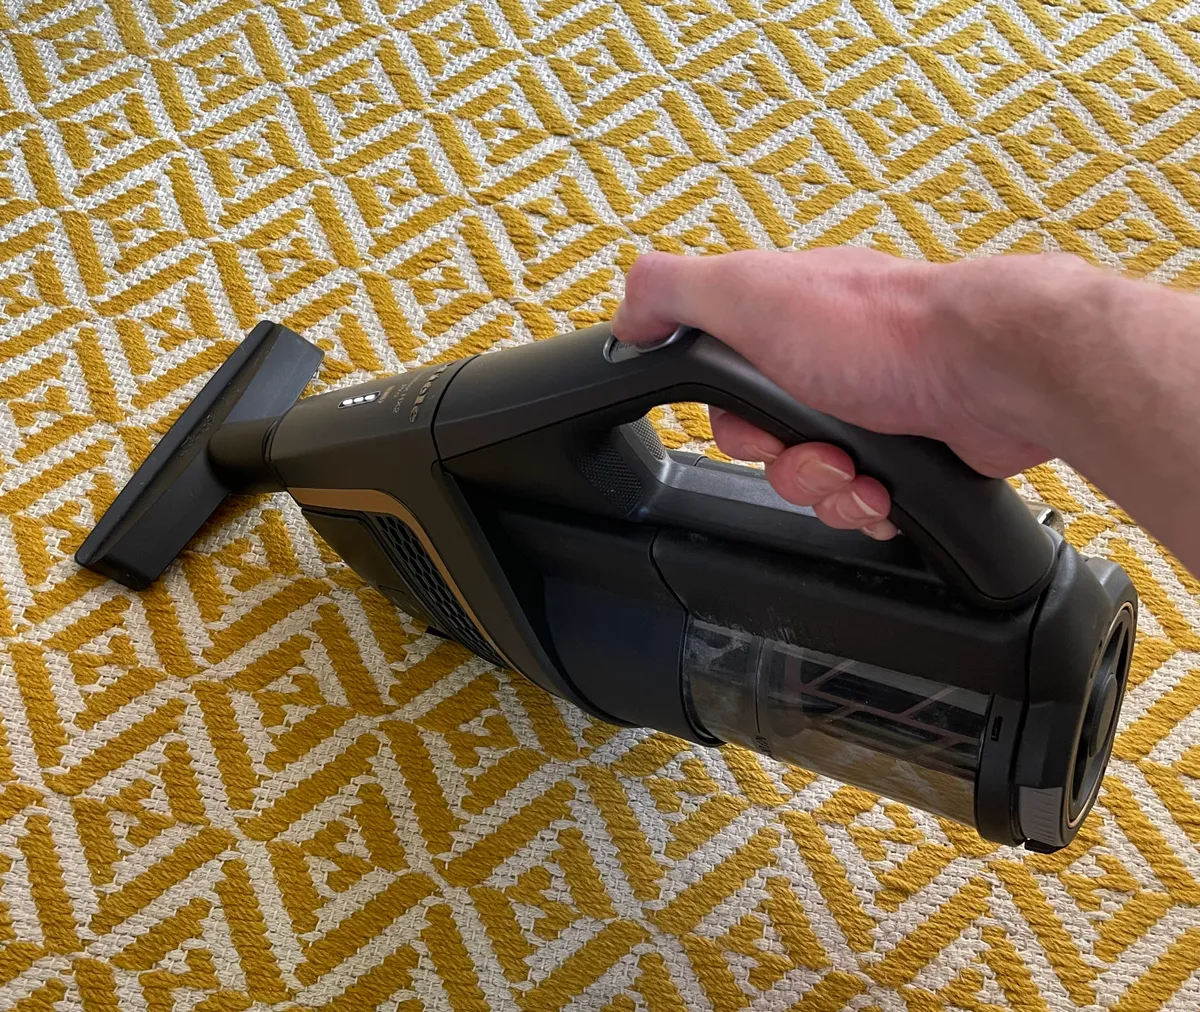 Miele HX2 Pro in handheld mode with upholstery nozzle